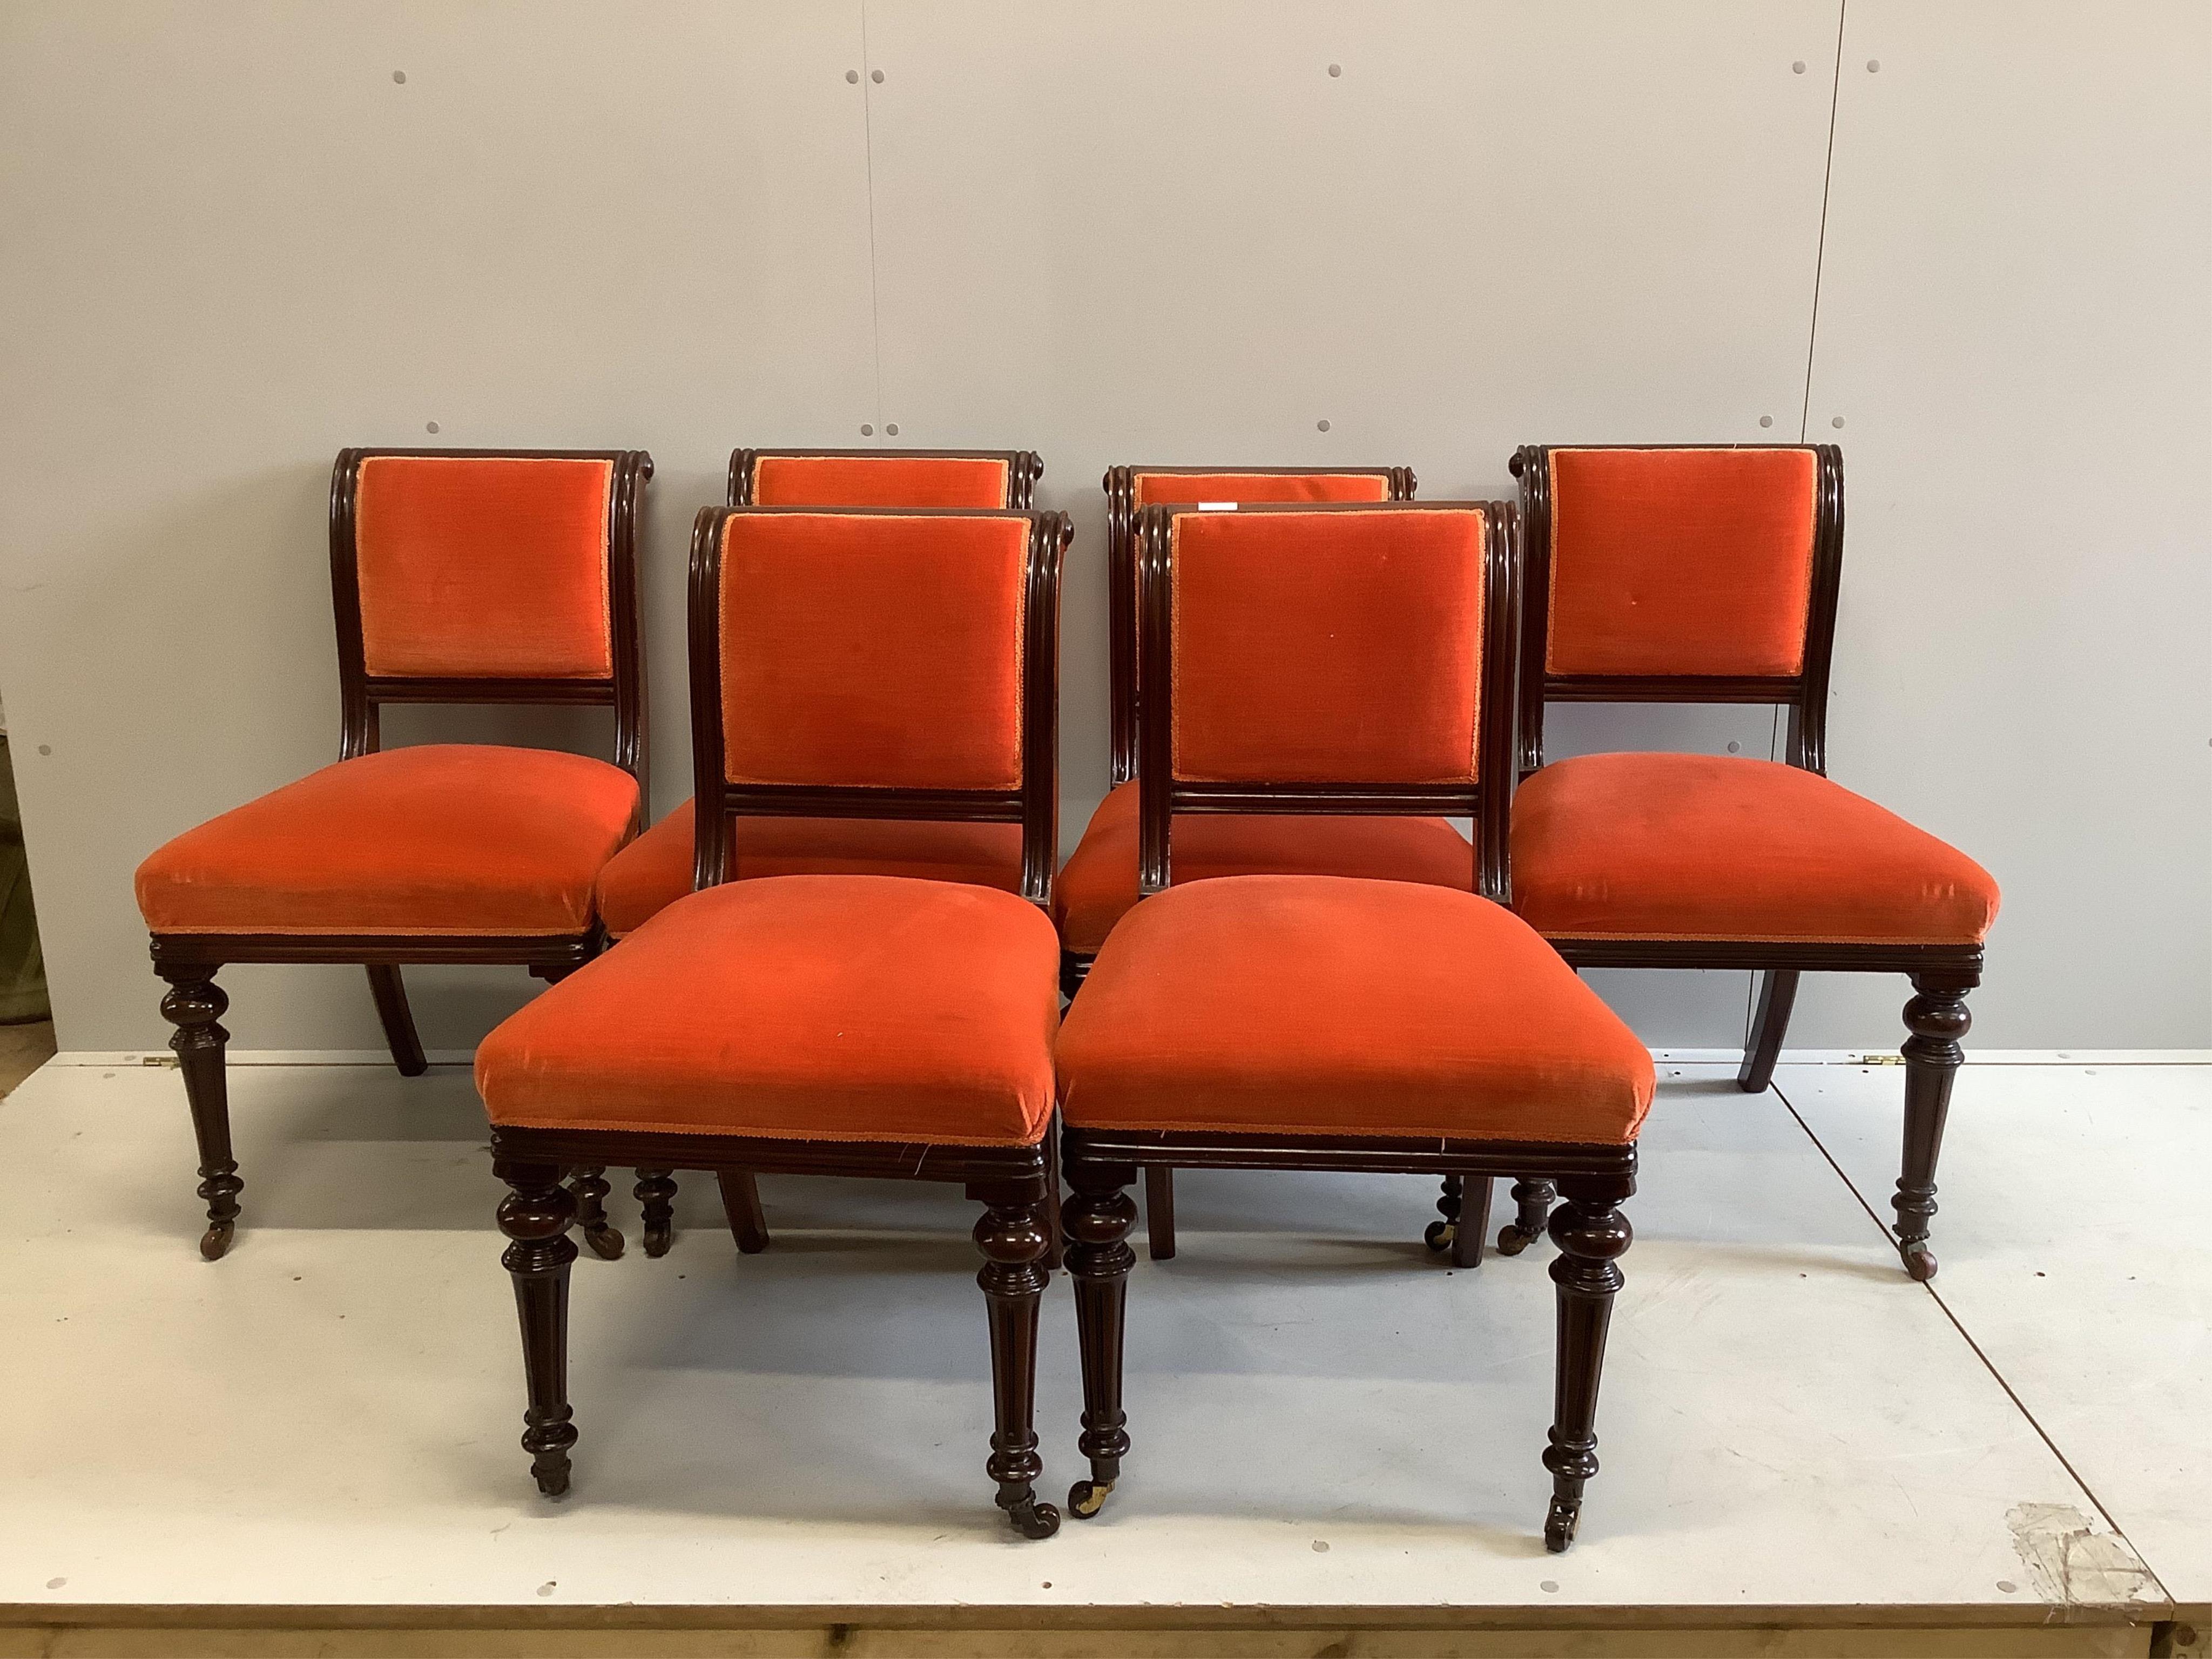 A set of six late Victorian upholstered mahogany dining chairs. Condition - good